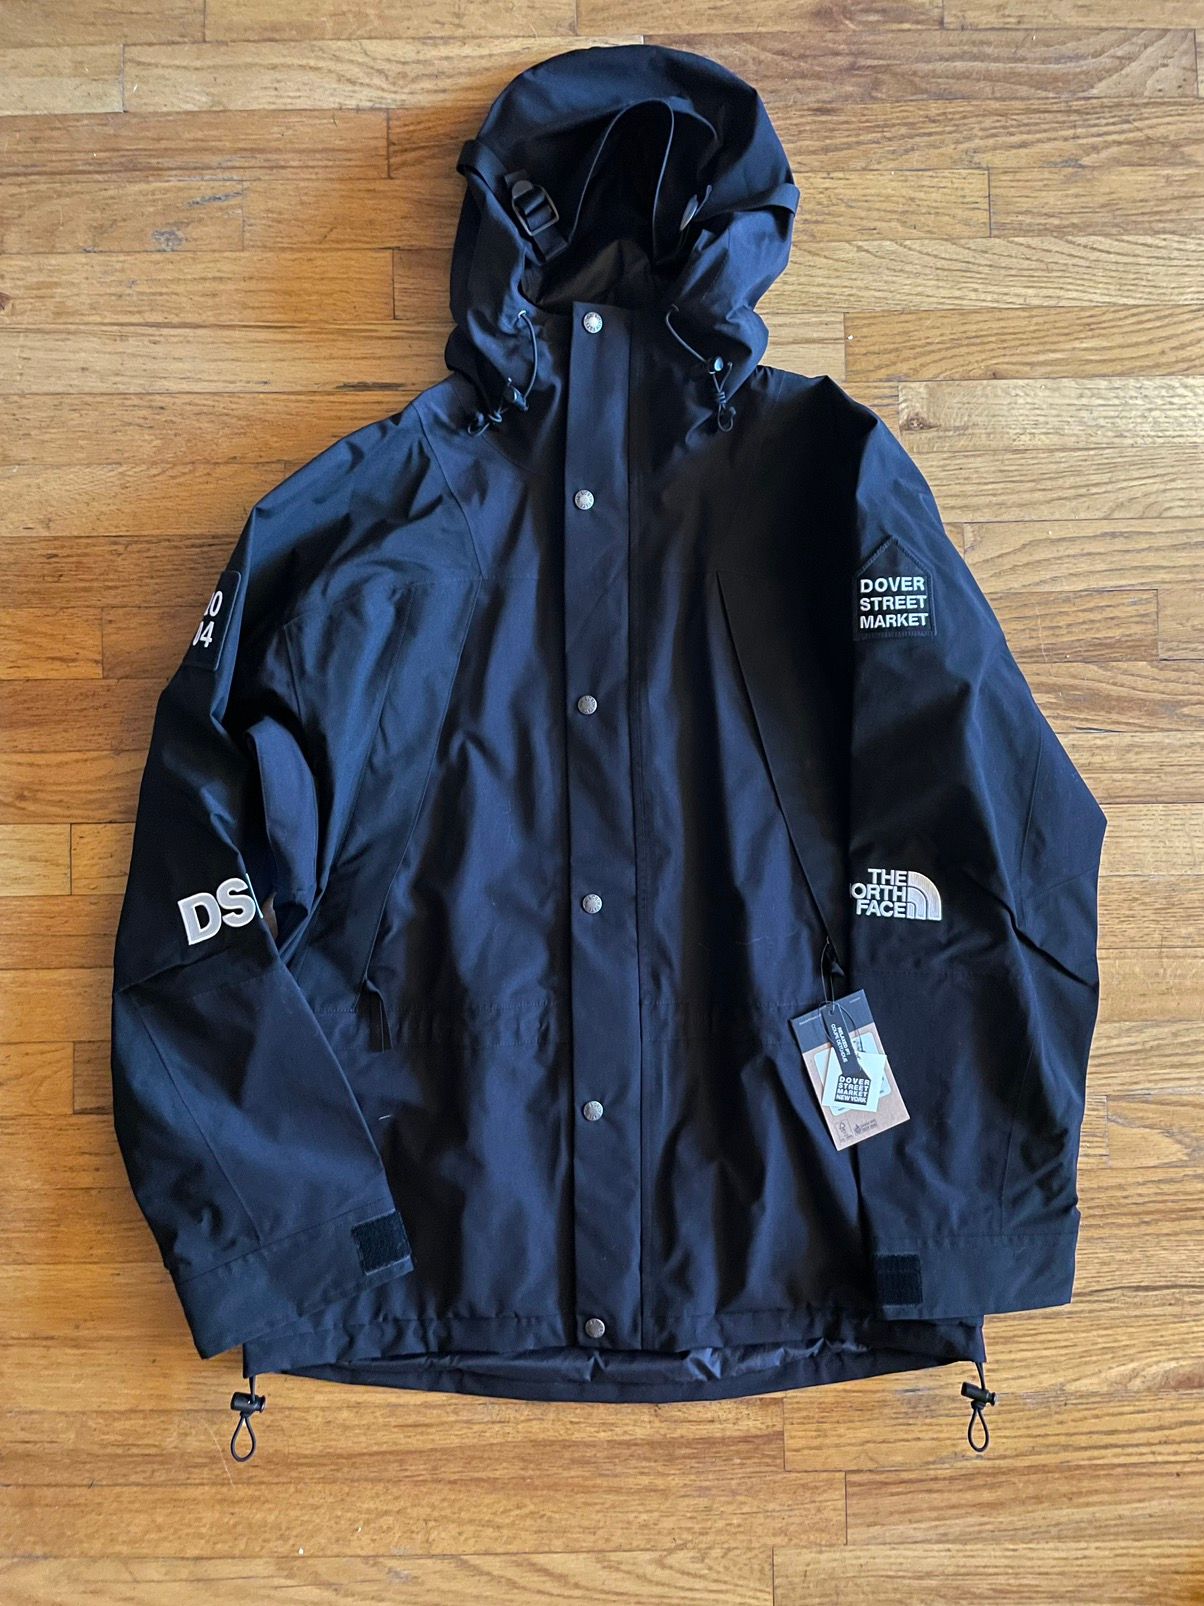 Vintage The North Face x Dover Street Market Mountain Light Jacket